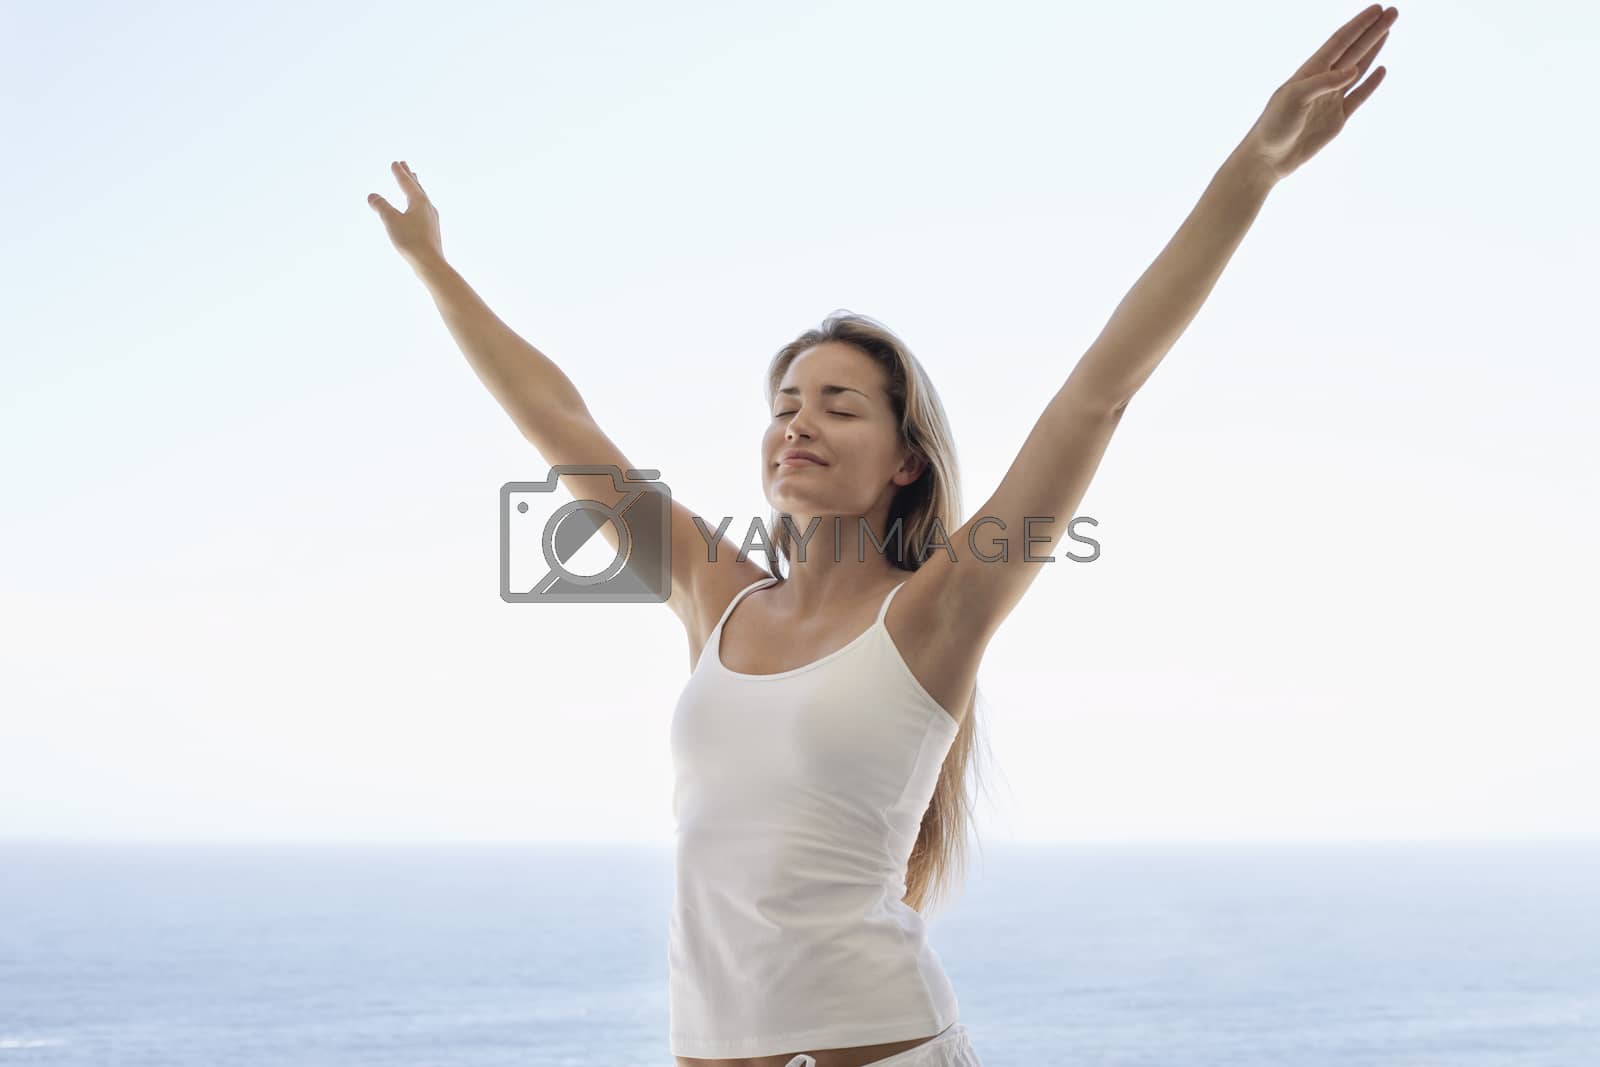 Royalty free image of Young woman with arms outstretched and eyes closed on beach by moodboard